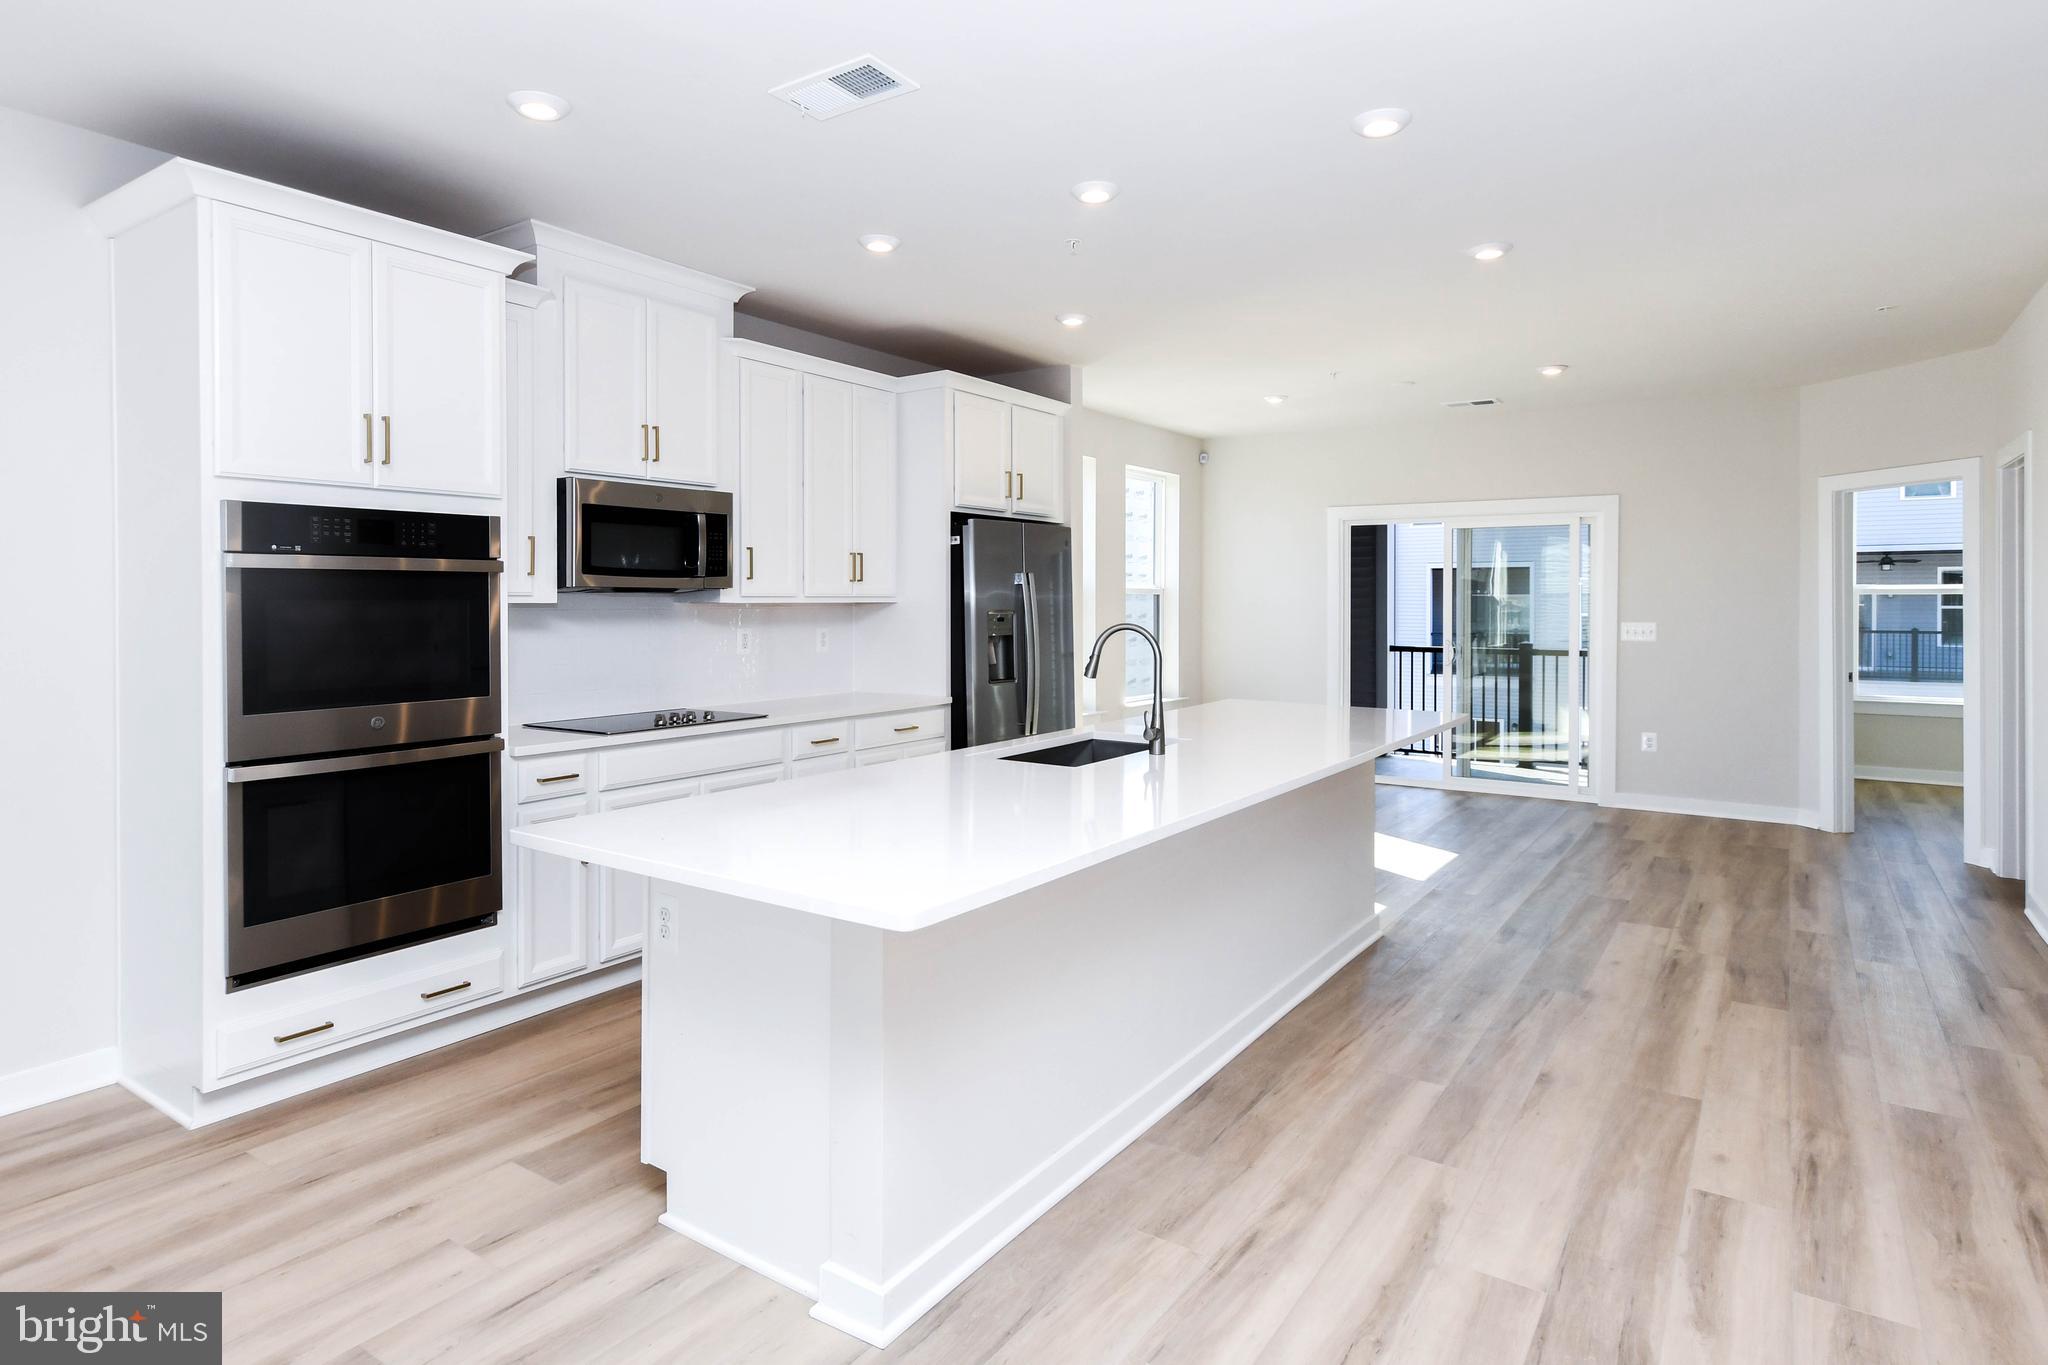 a kitchen with stainless steel appliances a kitchen island hardwood floor sink and stove